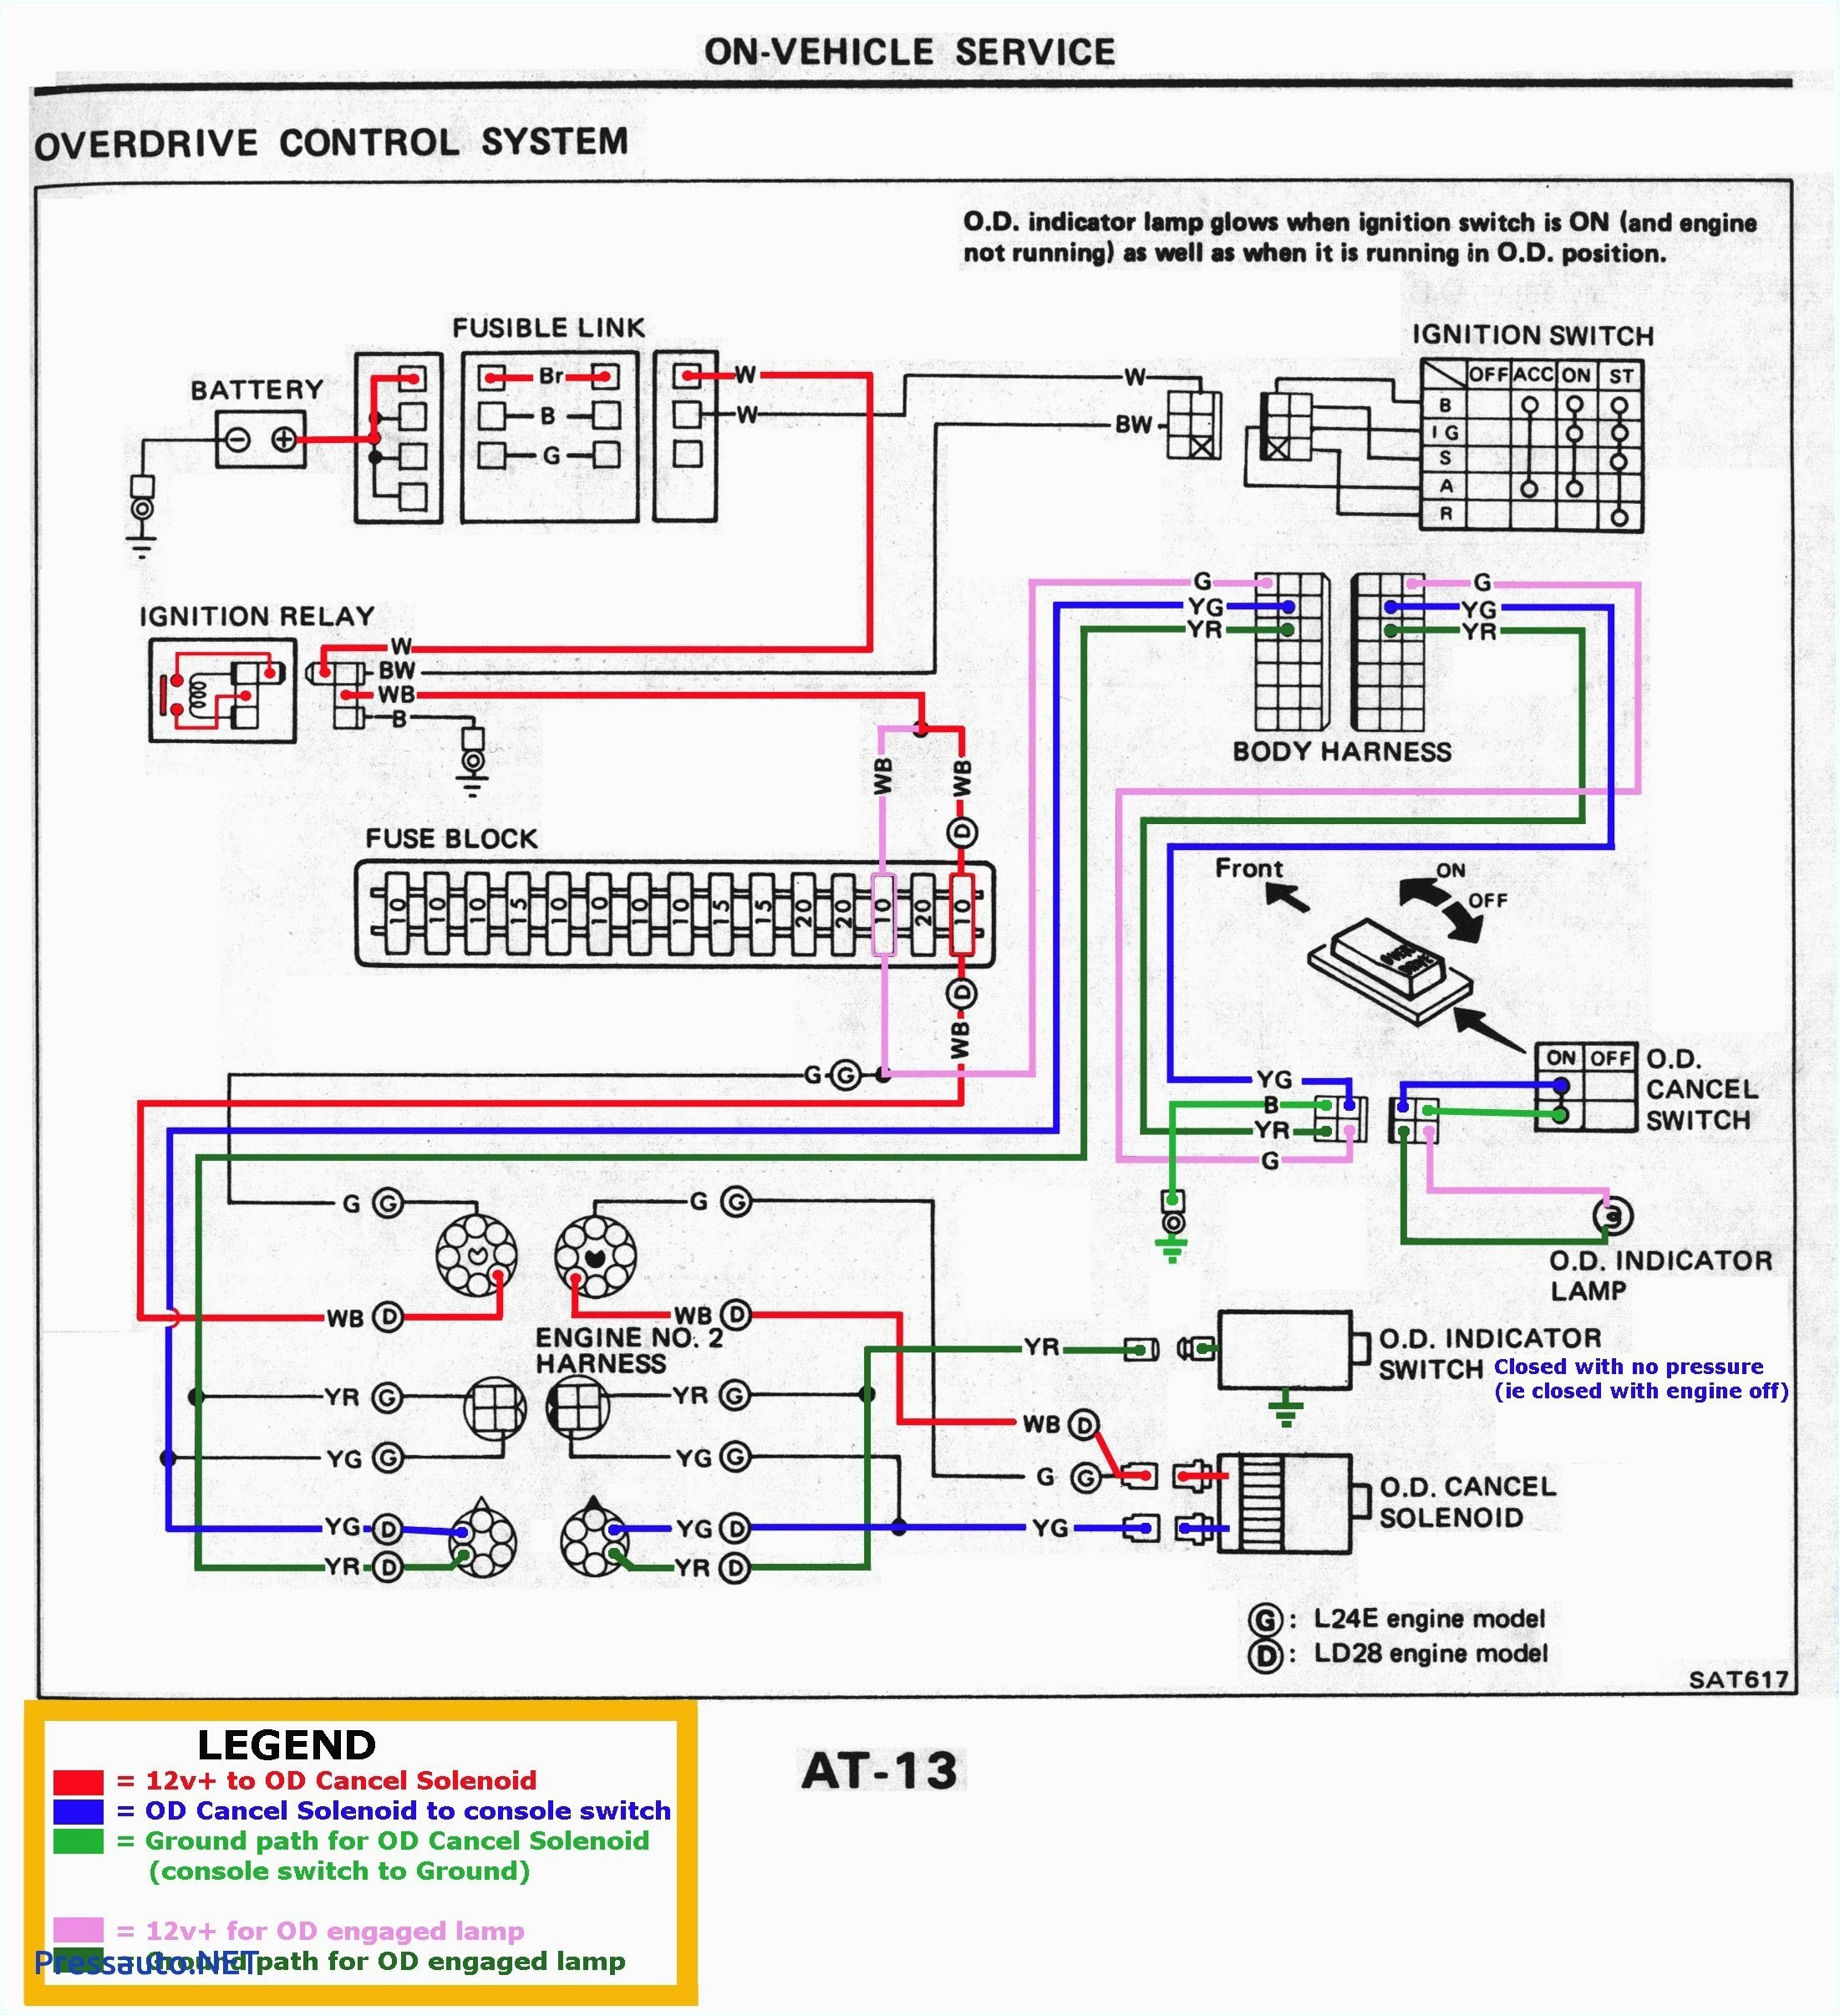 schematic wiring color diagram use wiring diagram mix 00 saturn radio wiring color code 18